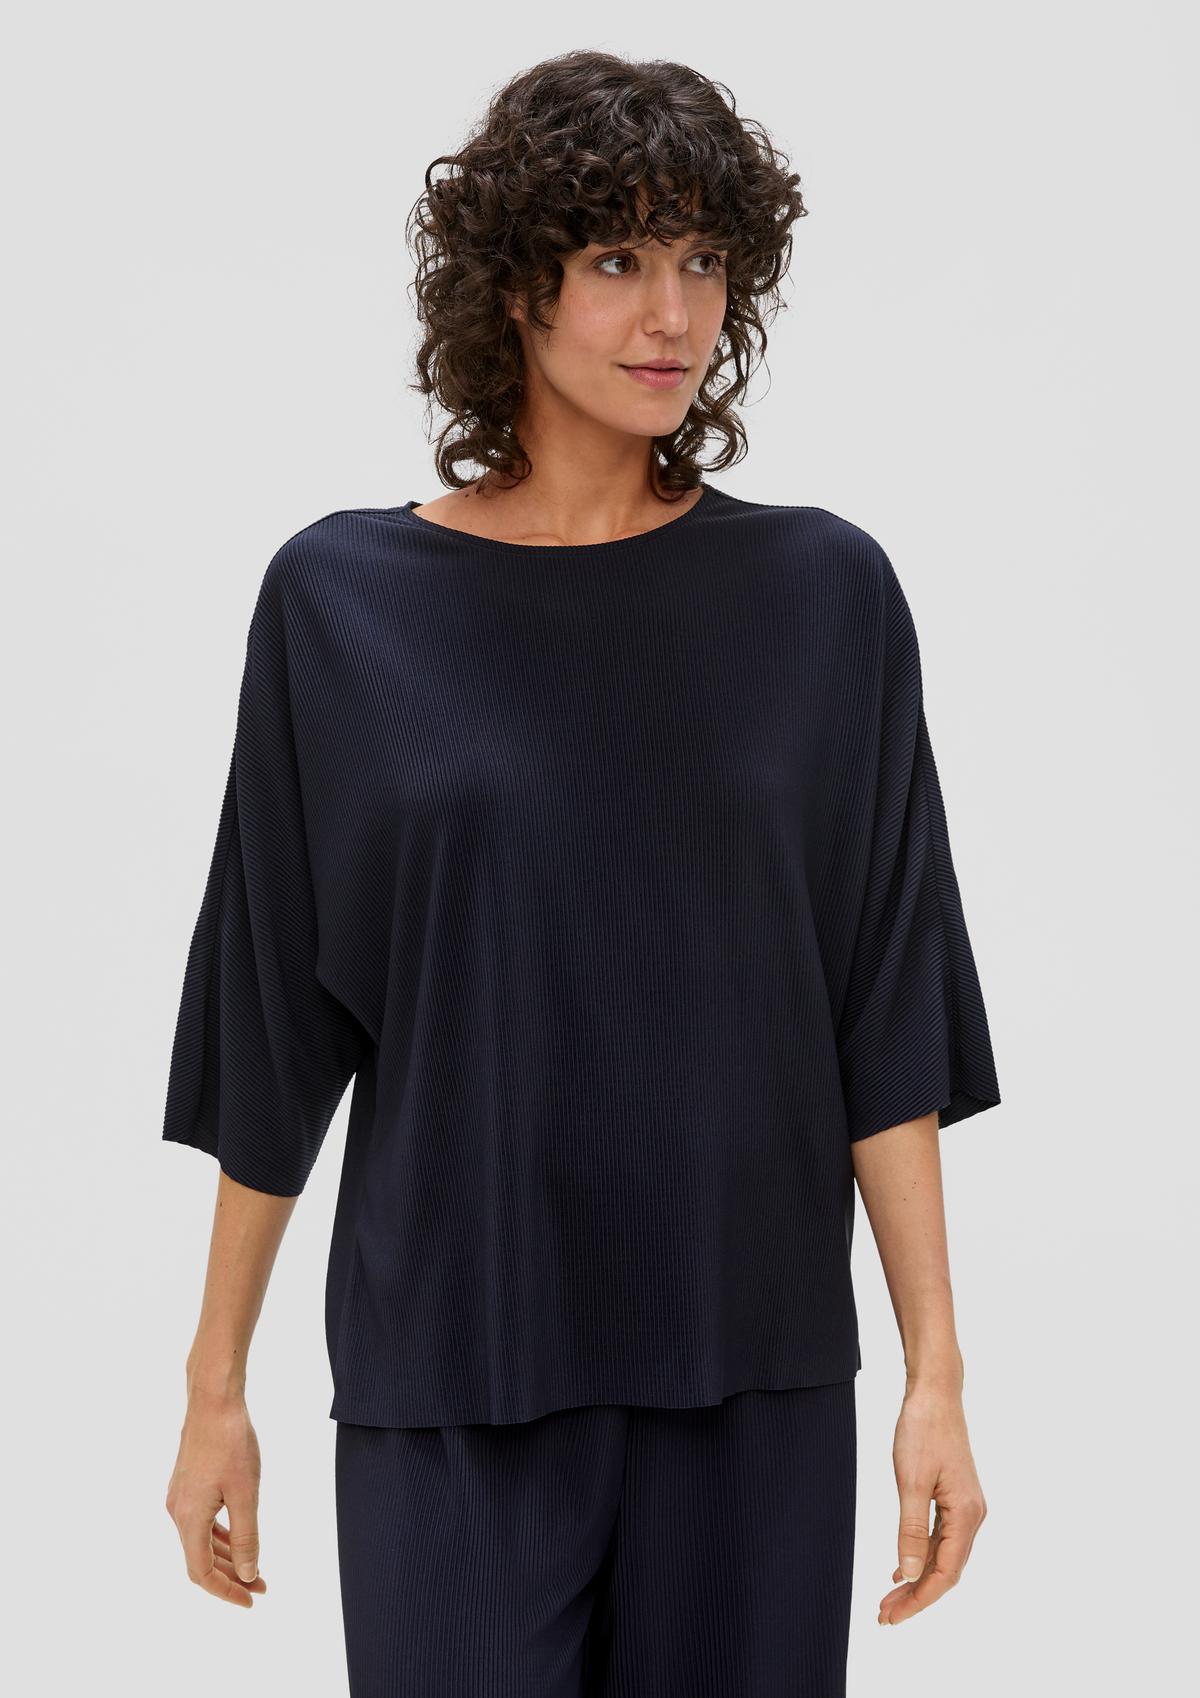 Pleated jersey top